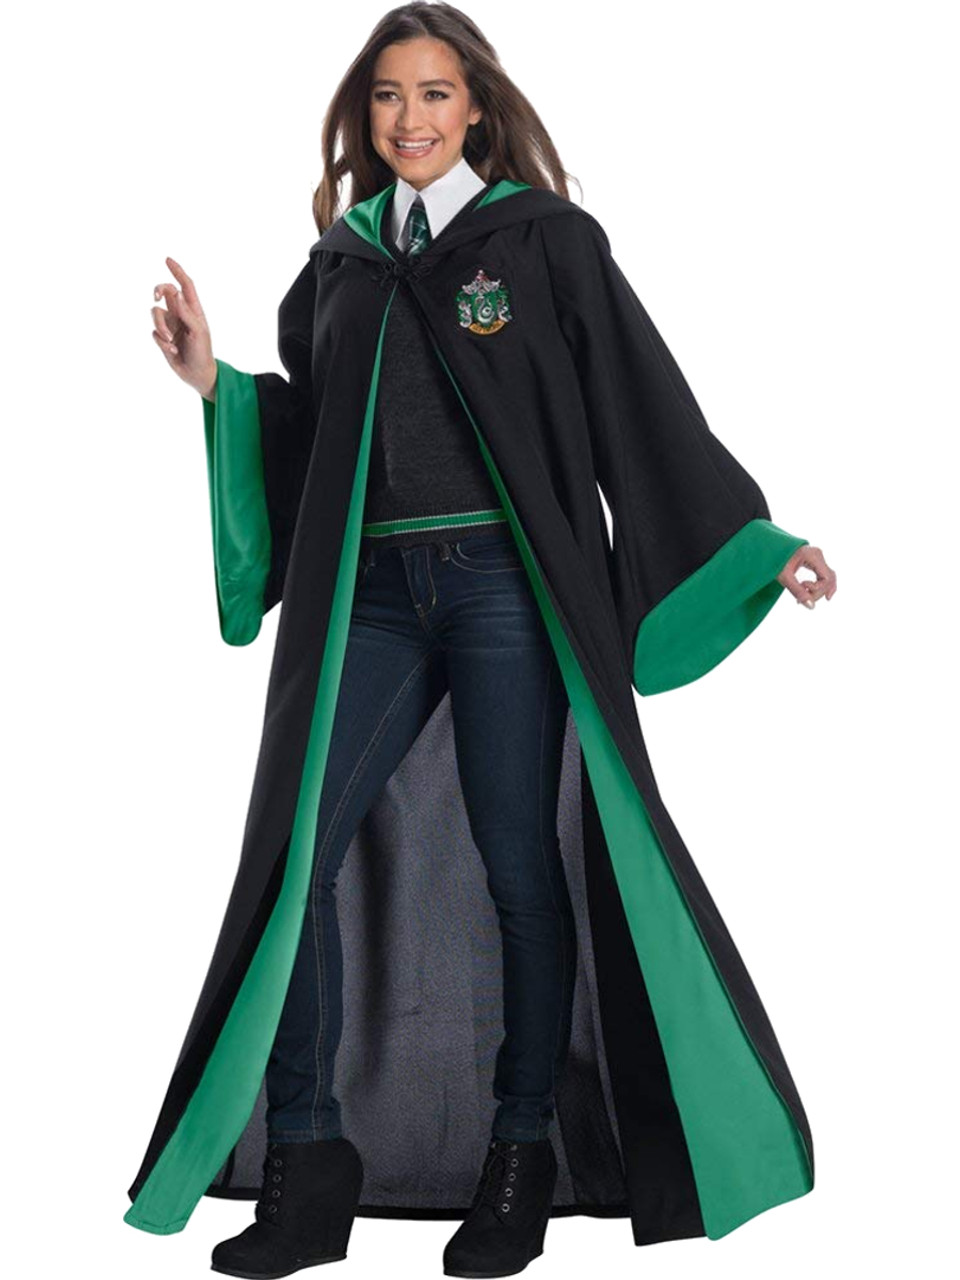 Slytherin Student Adults Costume 1X 46-48